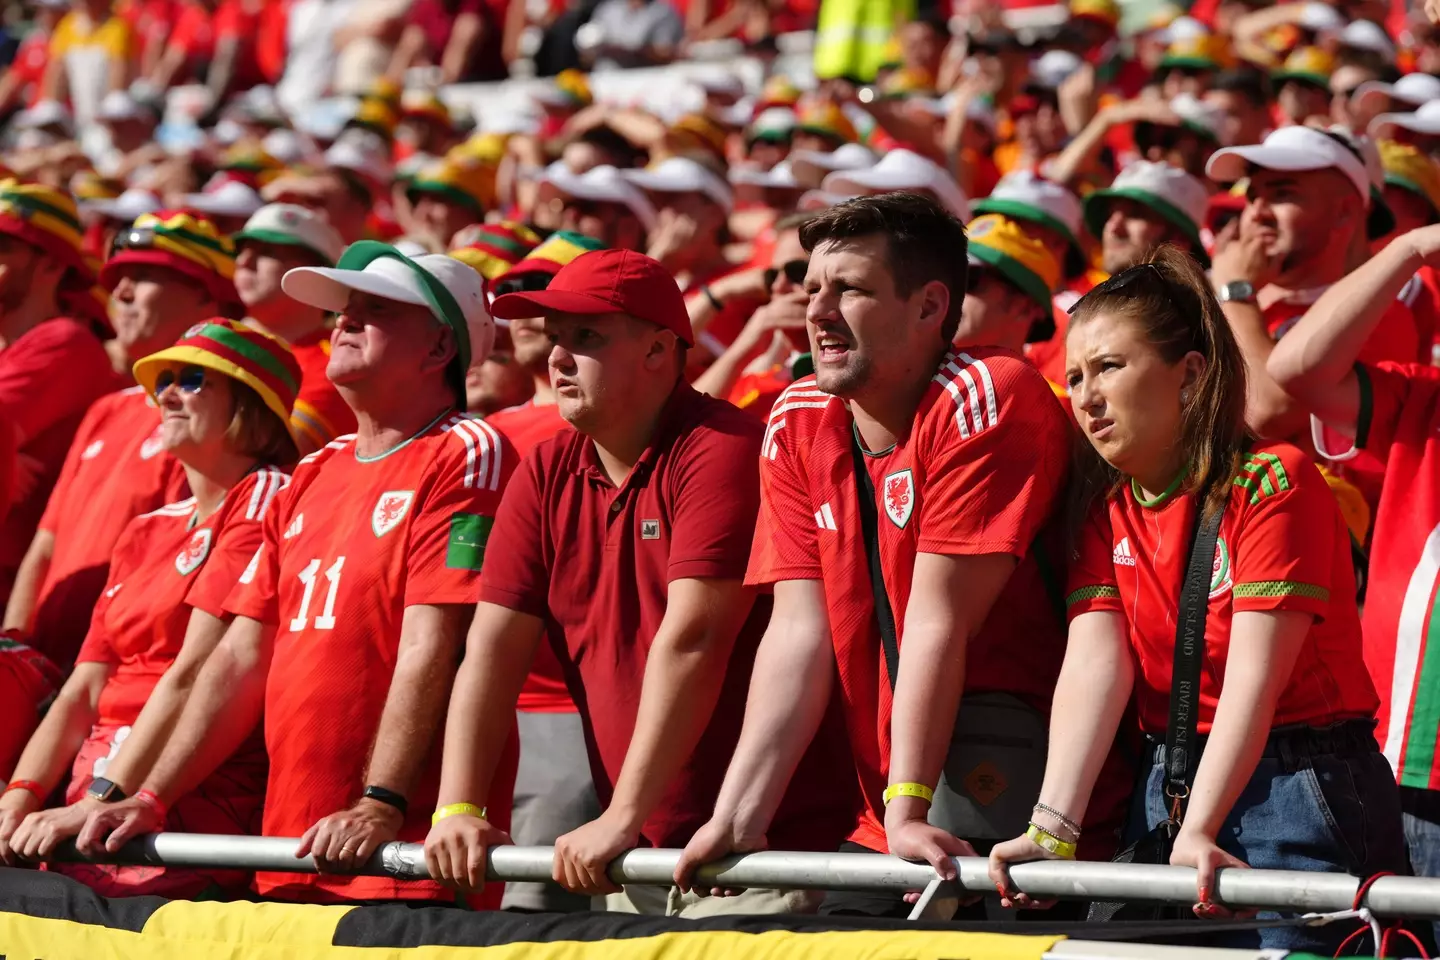 Wales fans look on during their loss to Iran in the World Cup. Image: Alamy